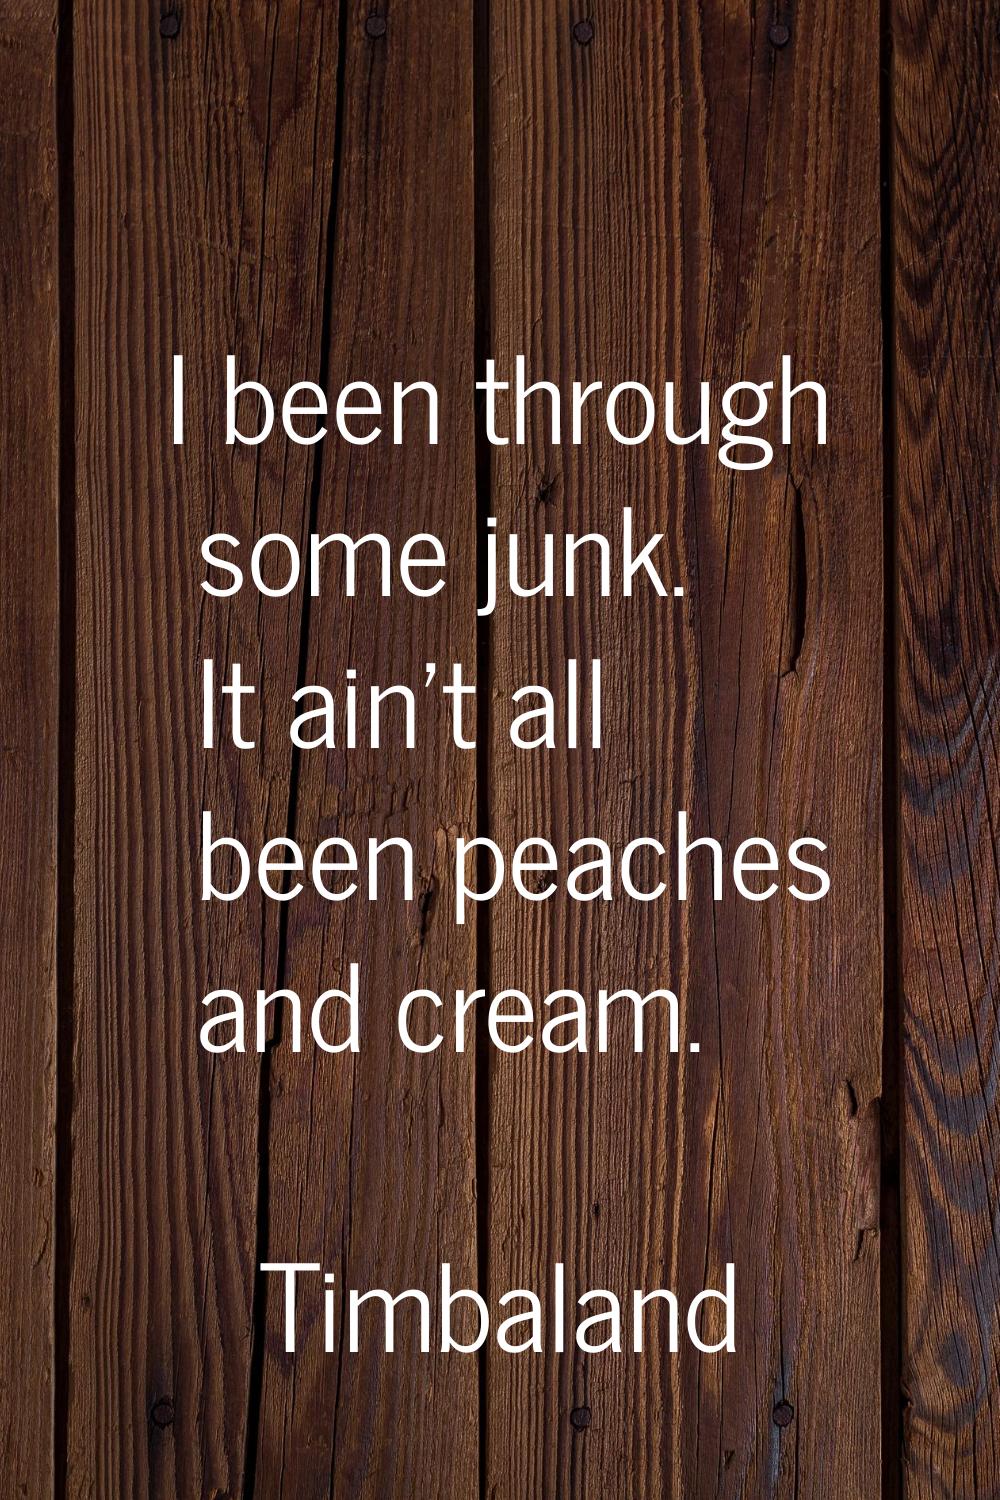 I been through some junk. It ain't all been peaches and cream.